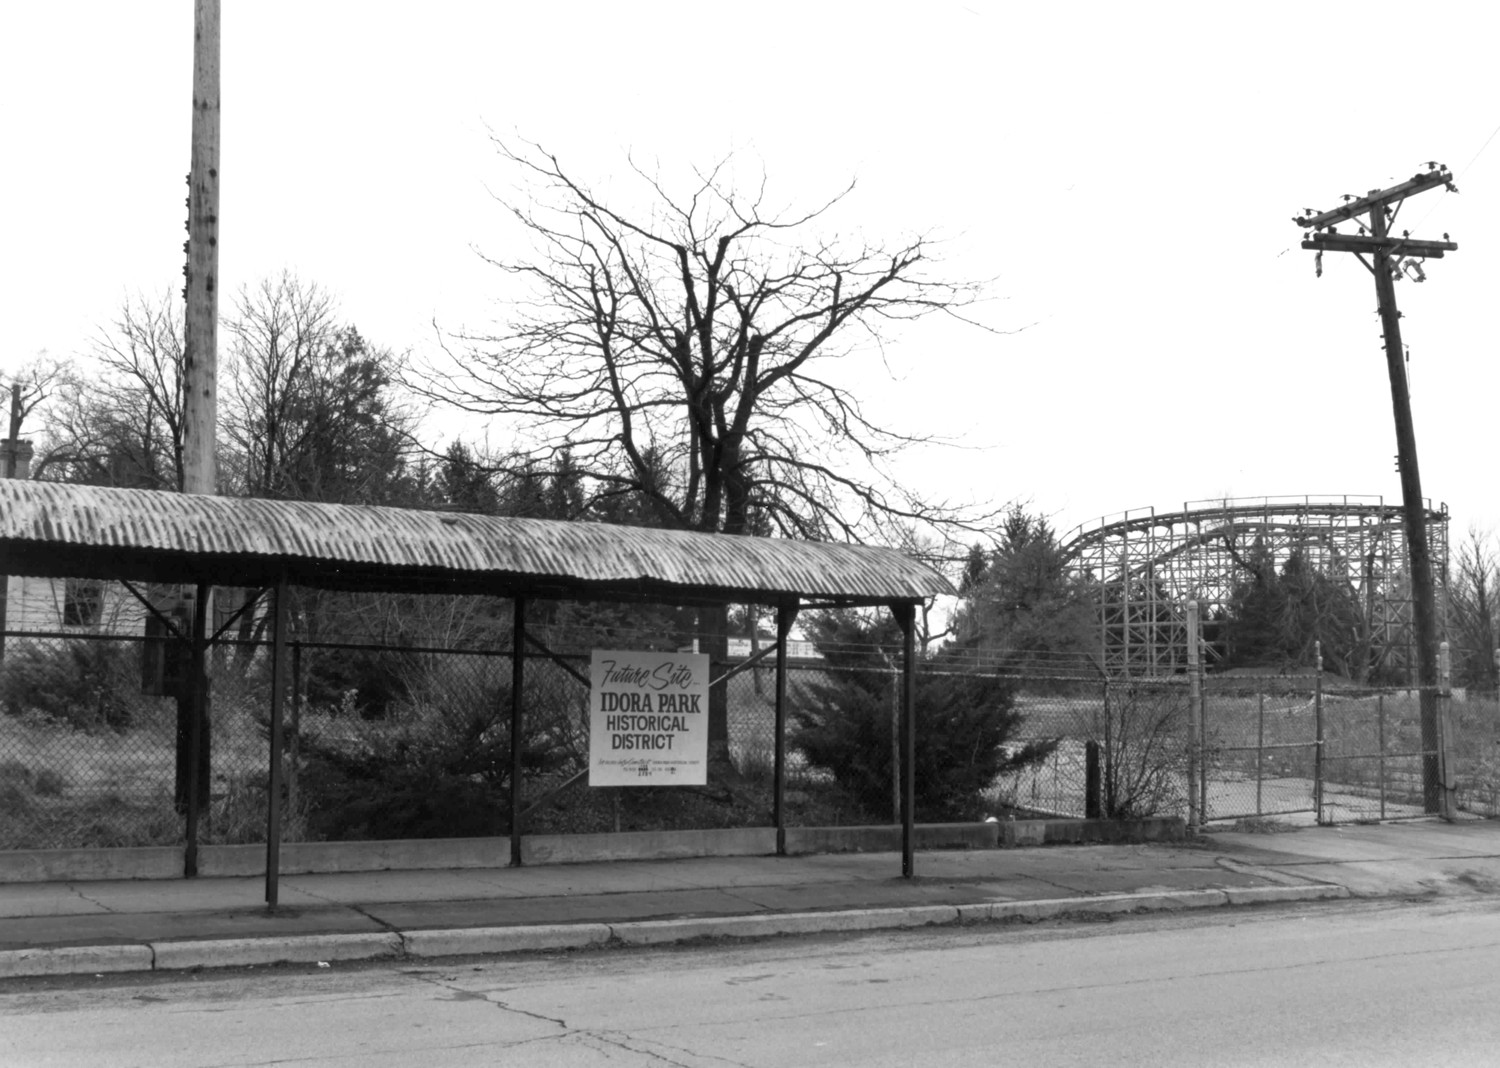 Idora Park, Youngstown Ohio North entrance bus shelter along McFarland Avenue, looking southwest and showing the Wildcat roller coaster in the distance (1992)